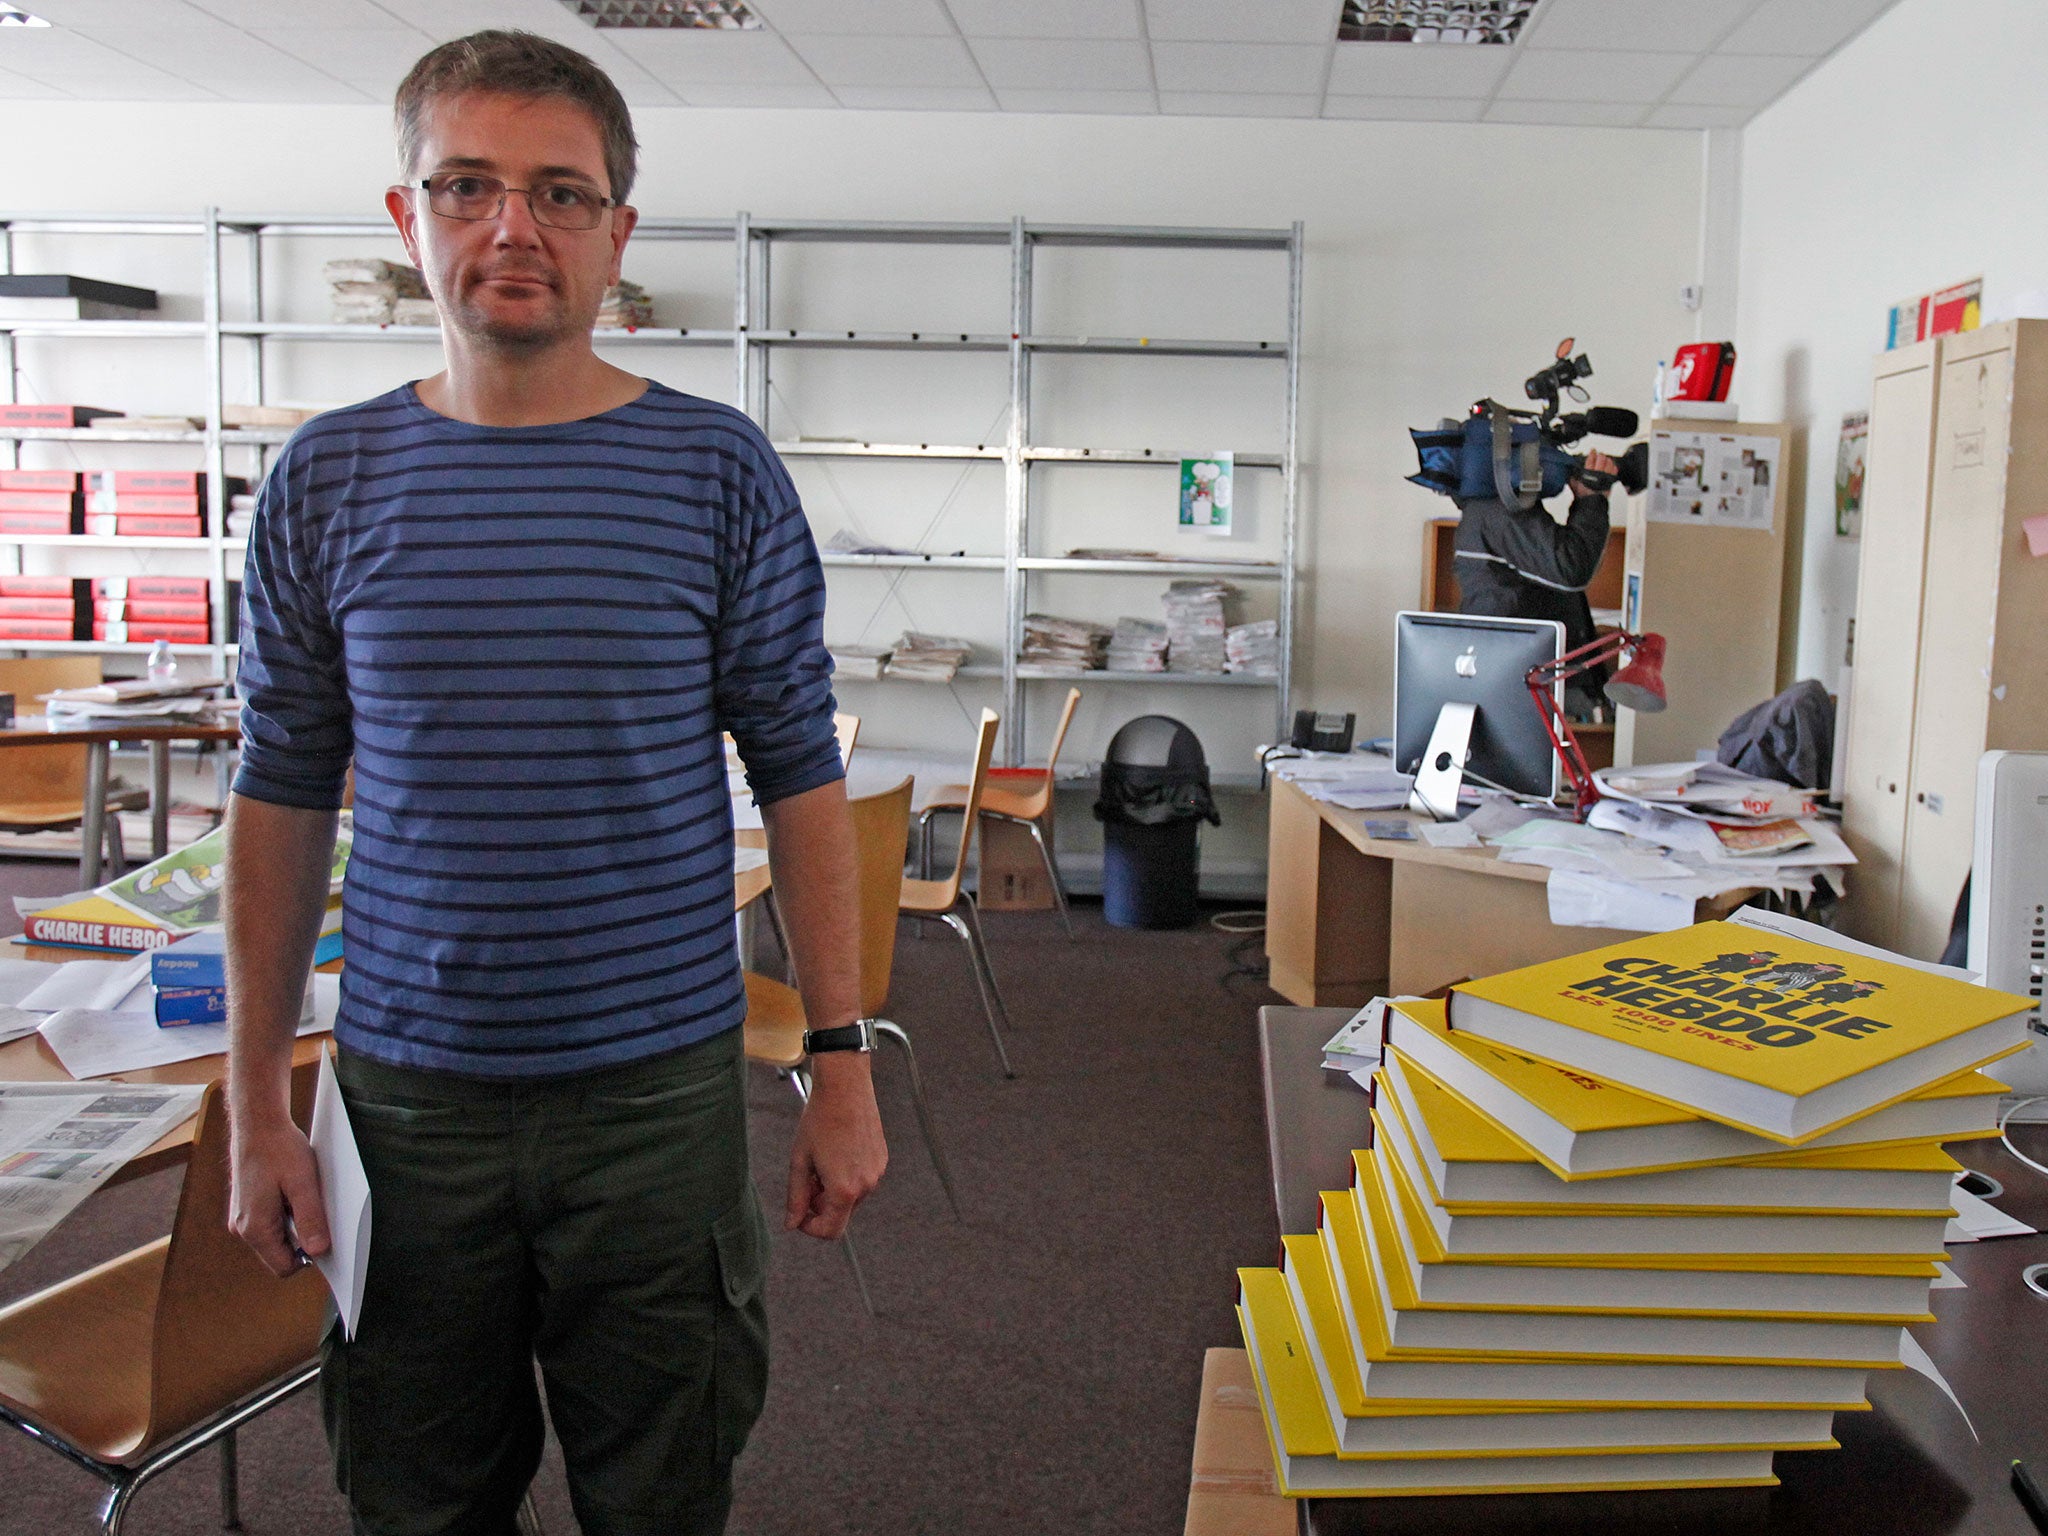 French cartoonist Charb, publishing director of French satirical weekly Charlie Hebdo, poses for photographs at their offices in Paris, September 19, 2012